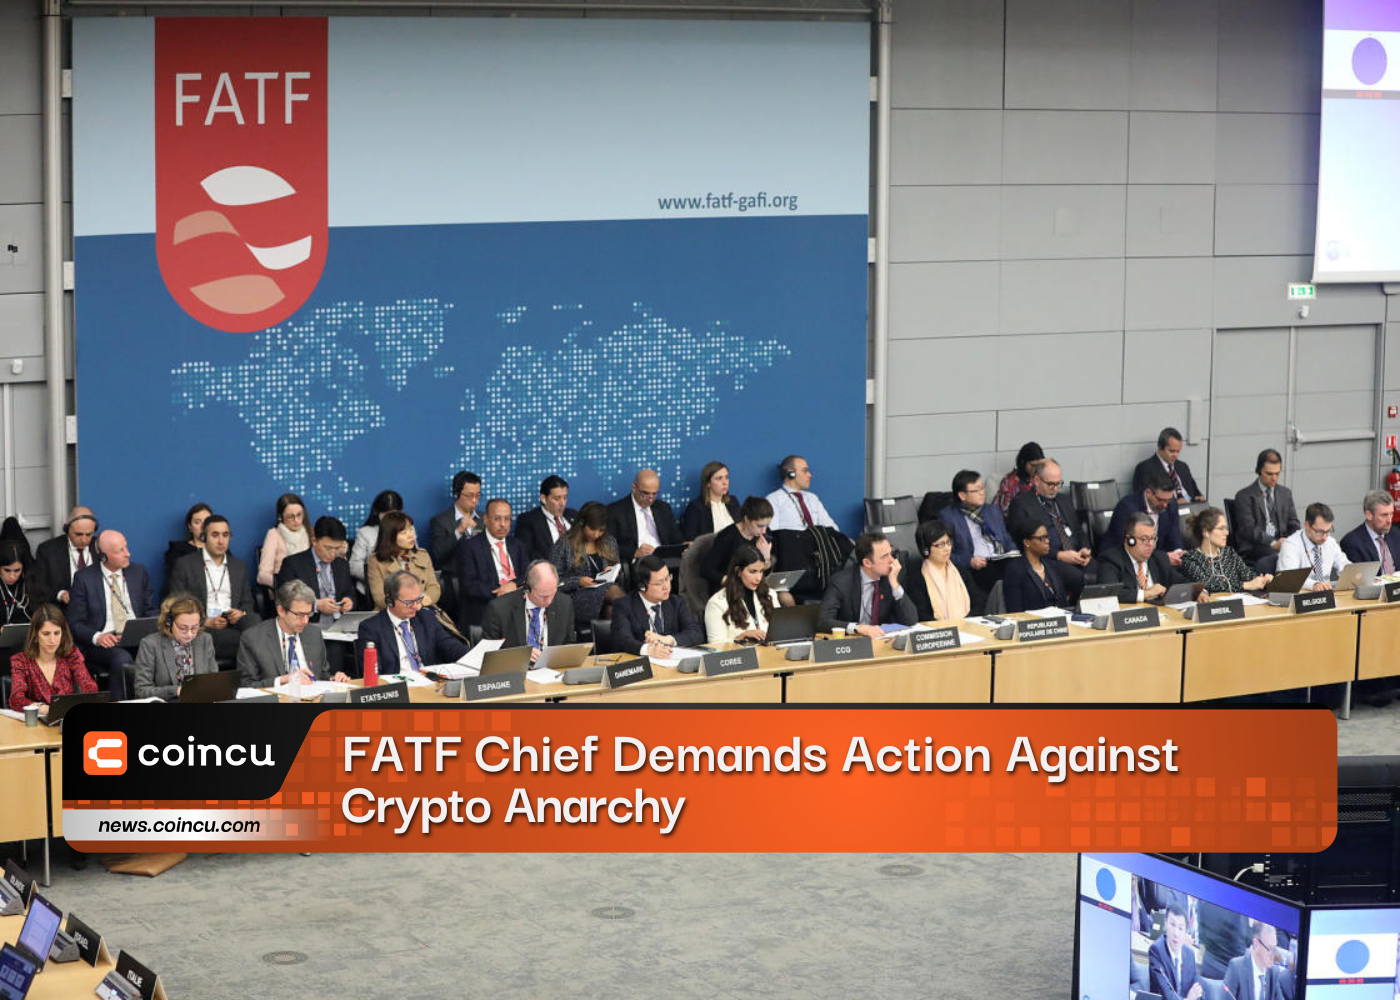 FATF Chief Demands Action Against Crypto Anarchy